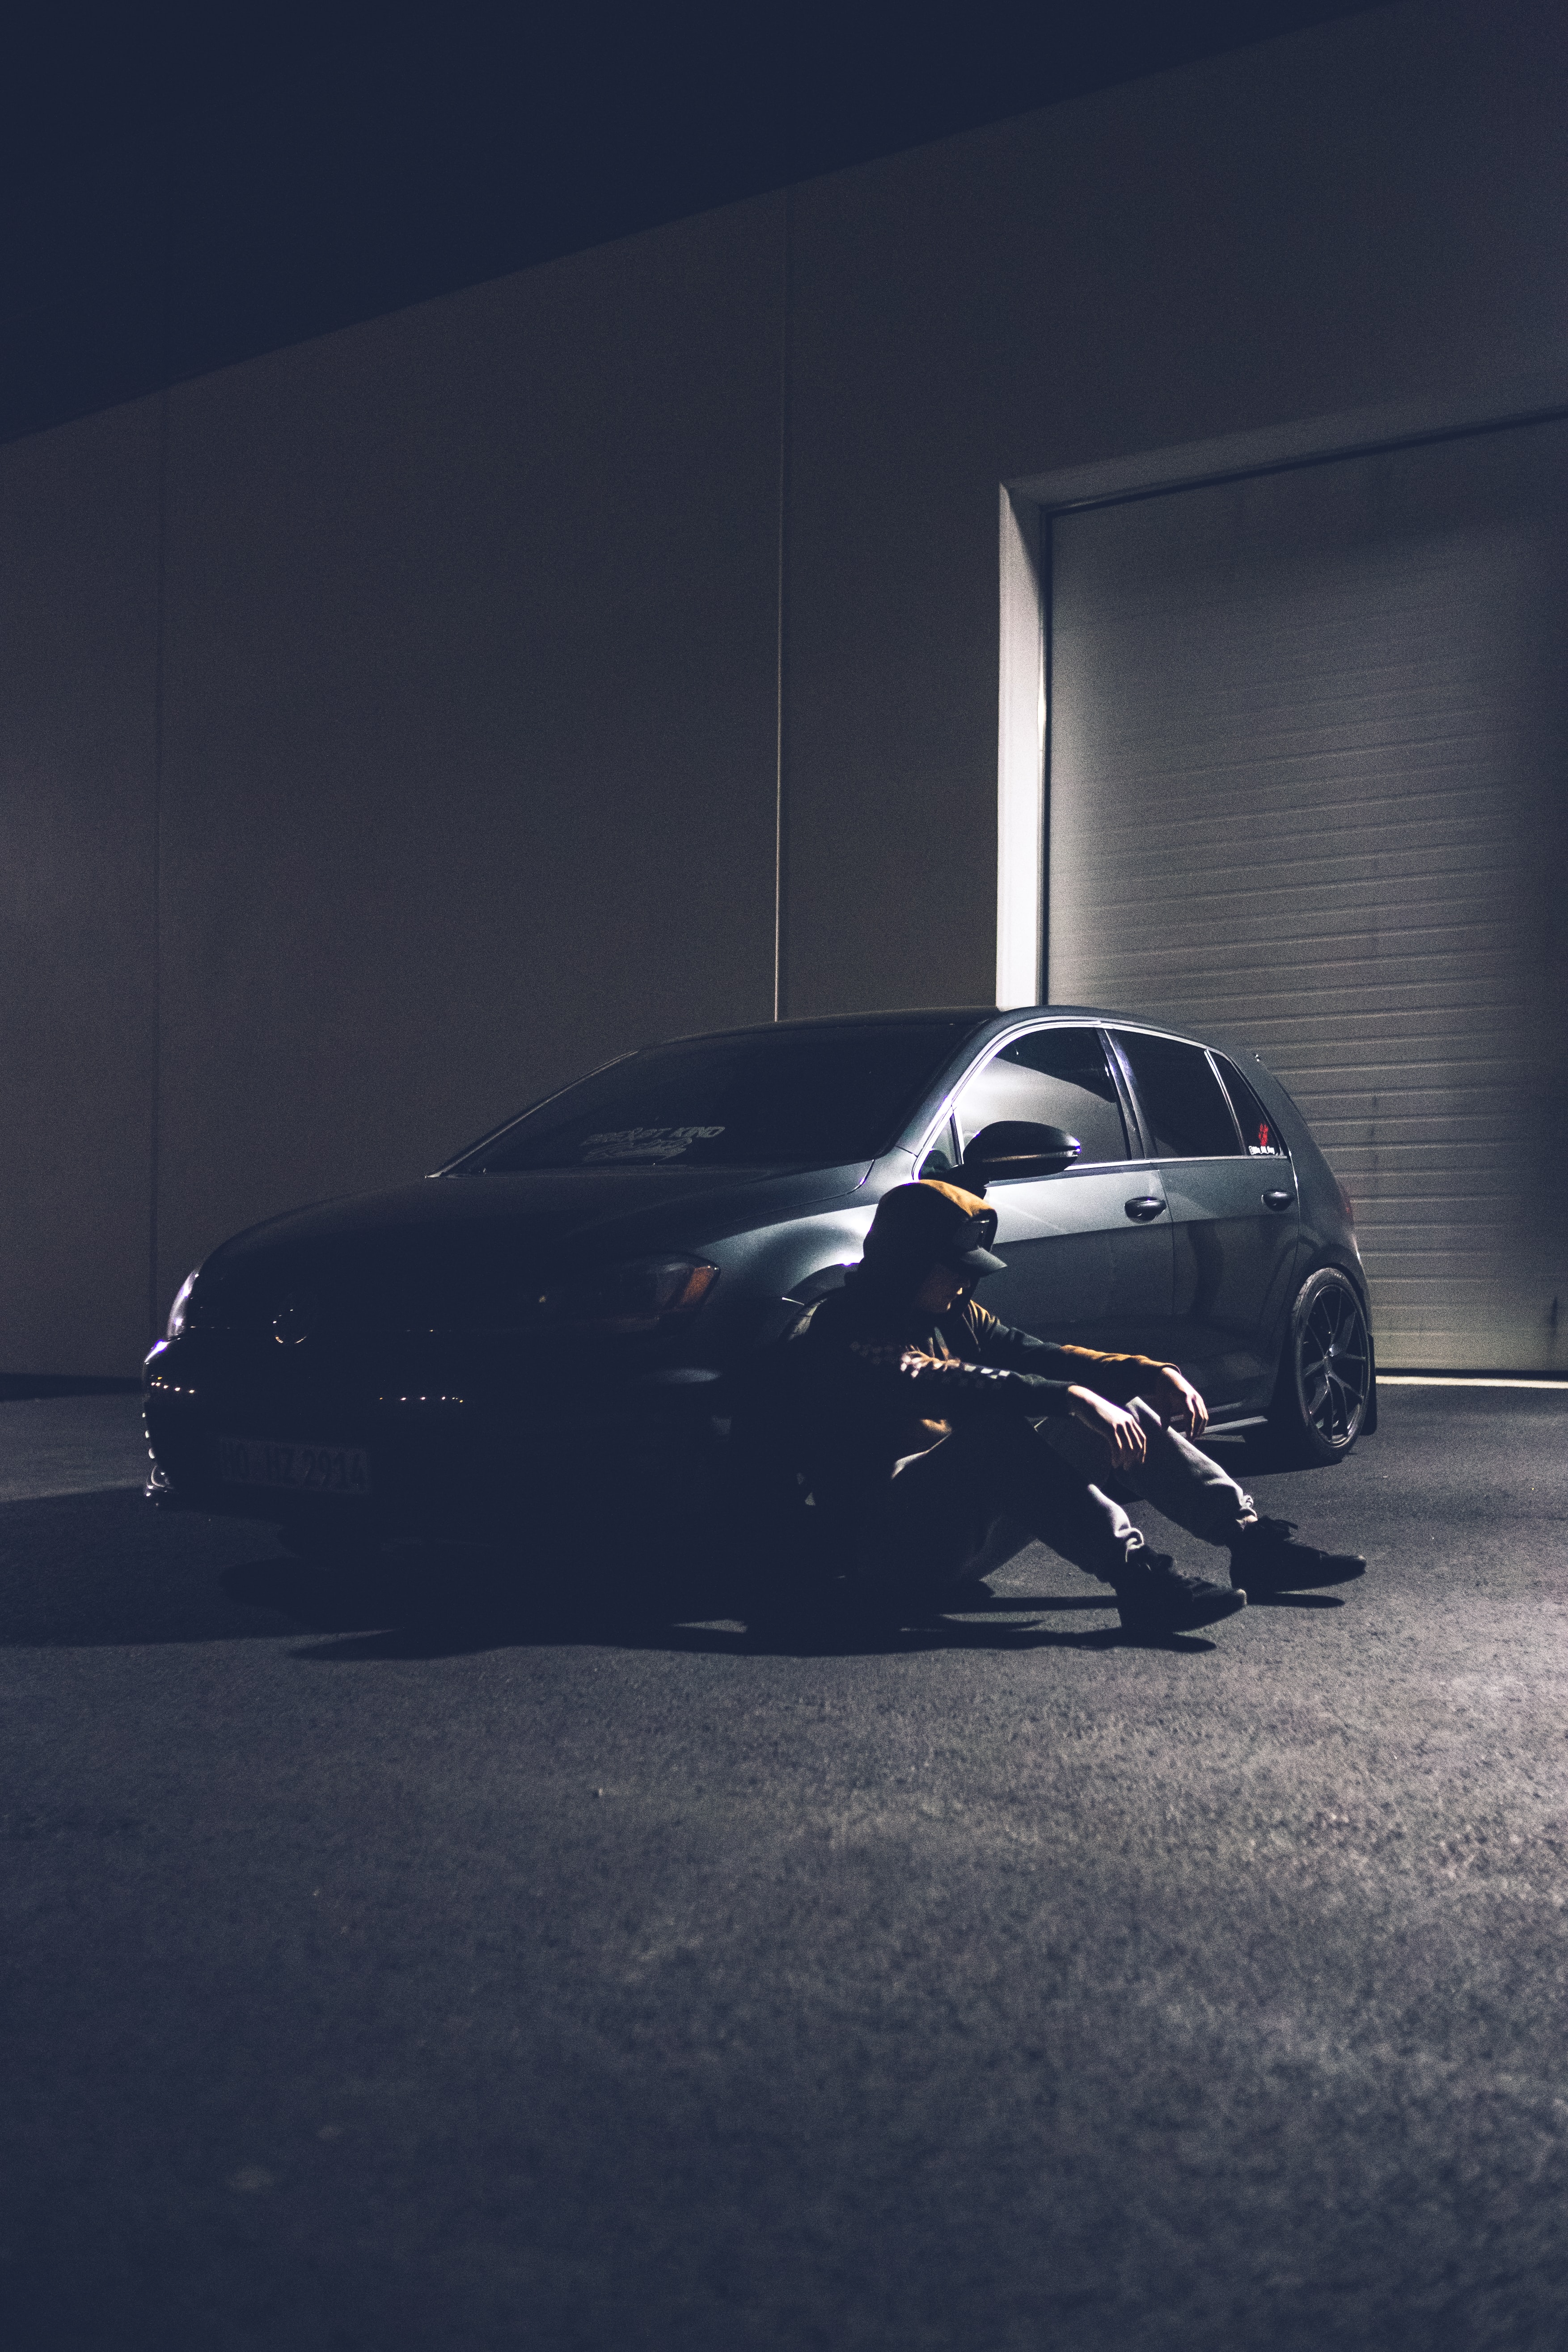 vertical wallpaper loneliness, sadness, alone, cars, car, machine, cap, lonely, sorrow